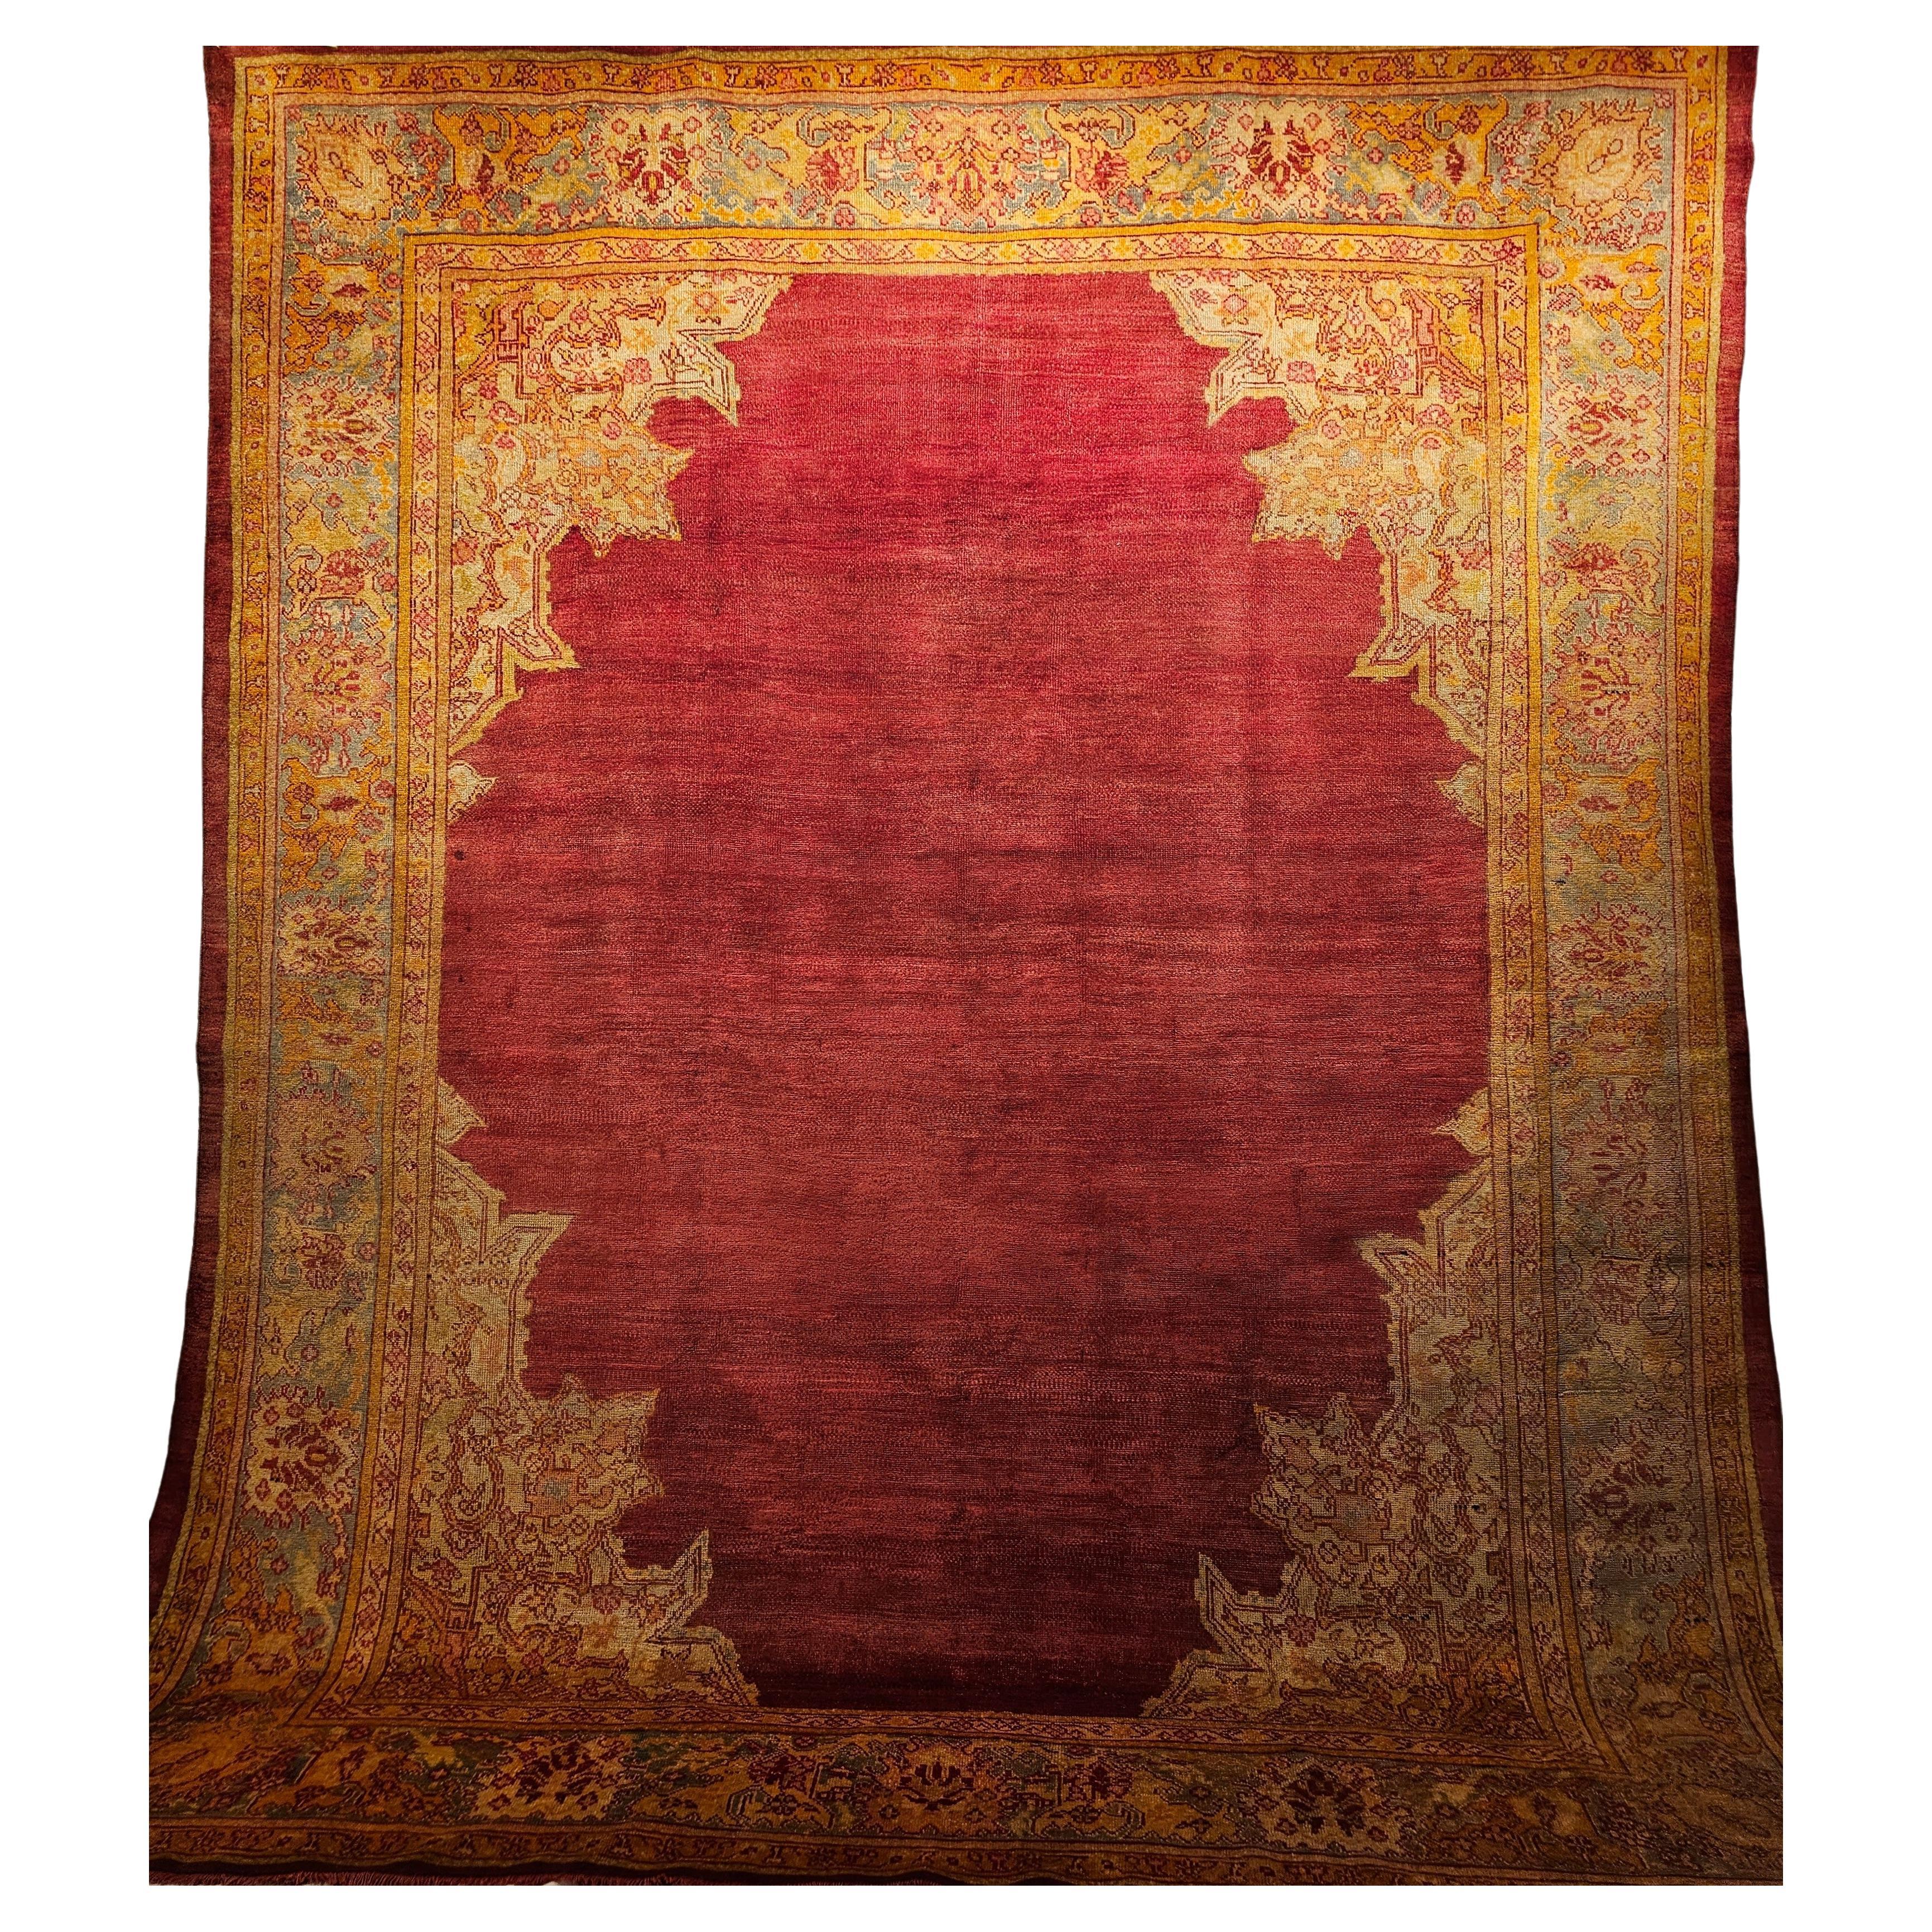 A late 19th Century Turkish Oushak room size rug in an open field design in brilliant colors of red, turquoise, and yellow.  The center of this beautiful Oushak is completely open and is in red.  The corner spandrels have palmate and arabesque